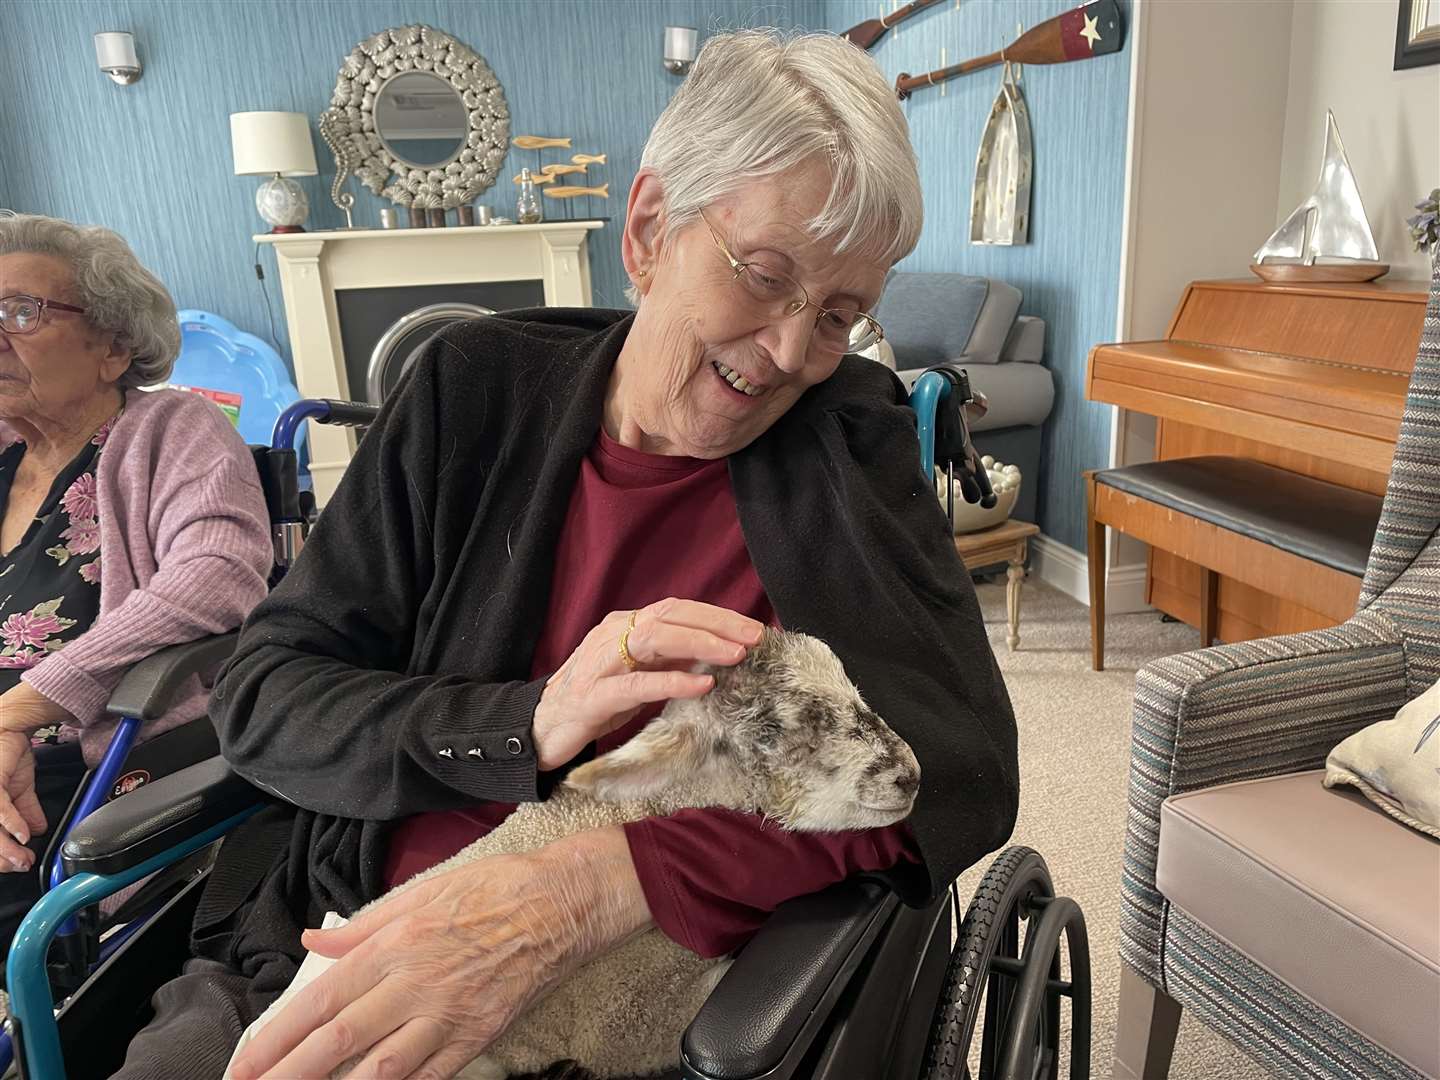 Residents got to cuddle the lambs at the care home in Whitstable. Picture: Harrier Lodge